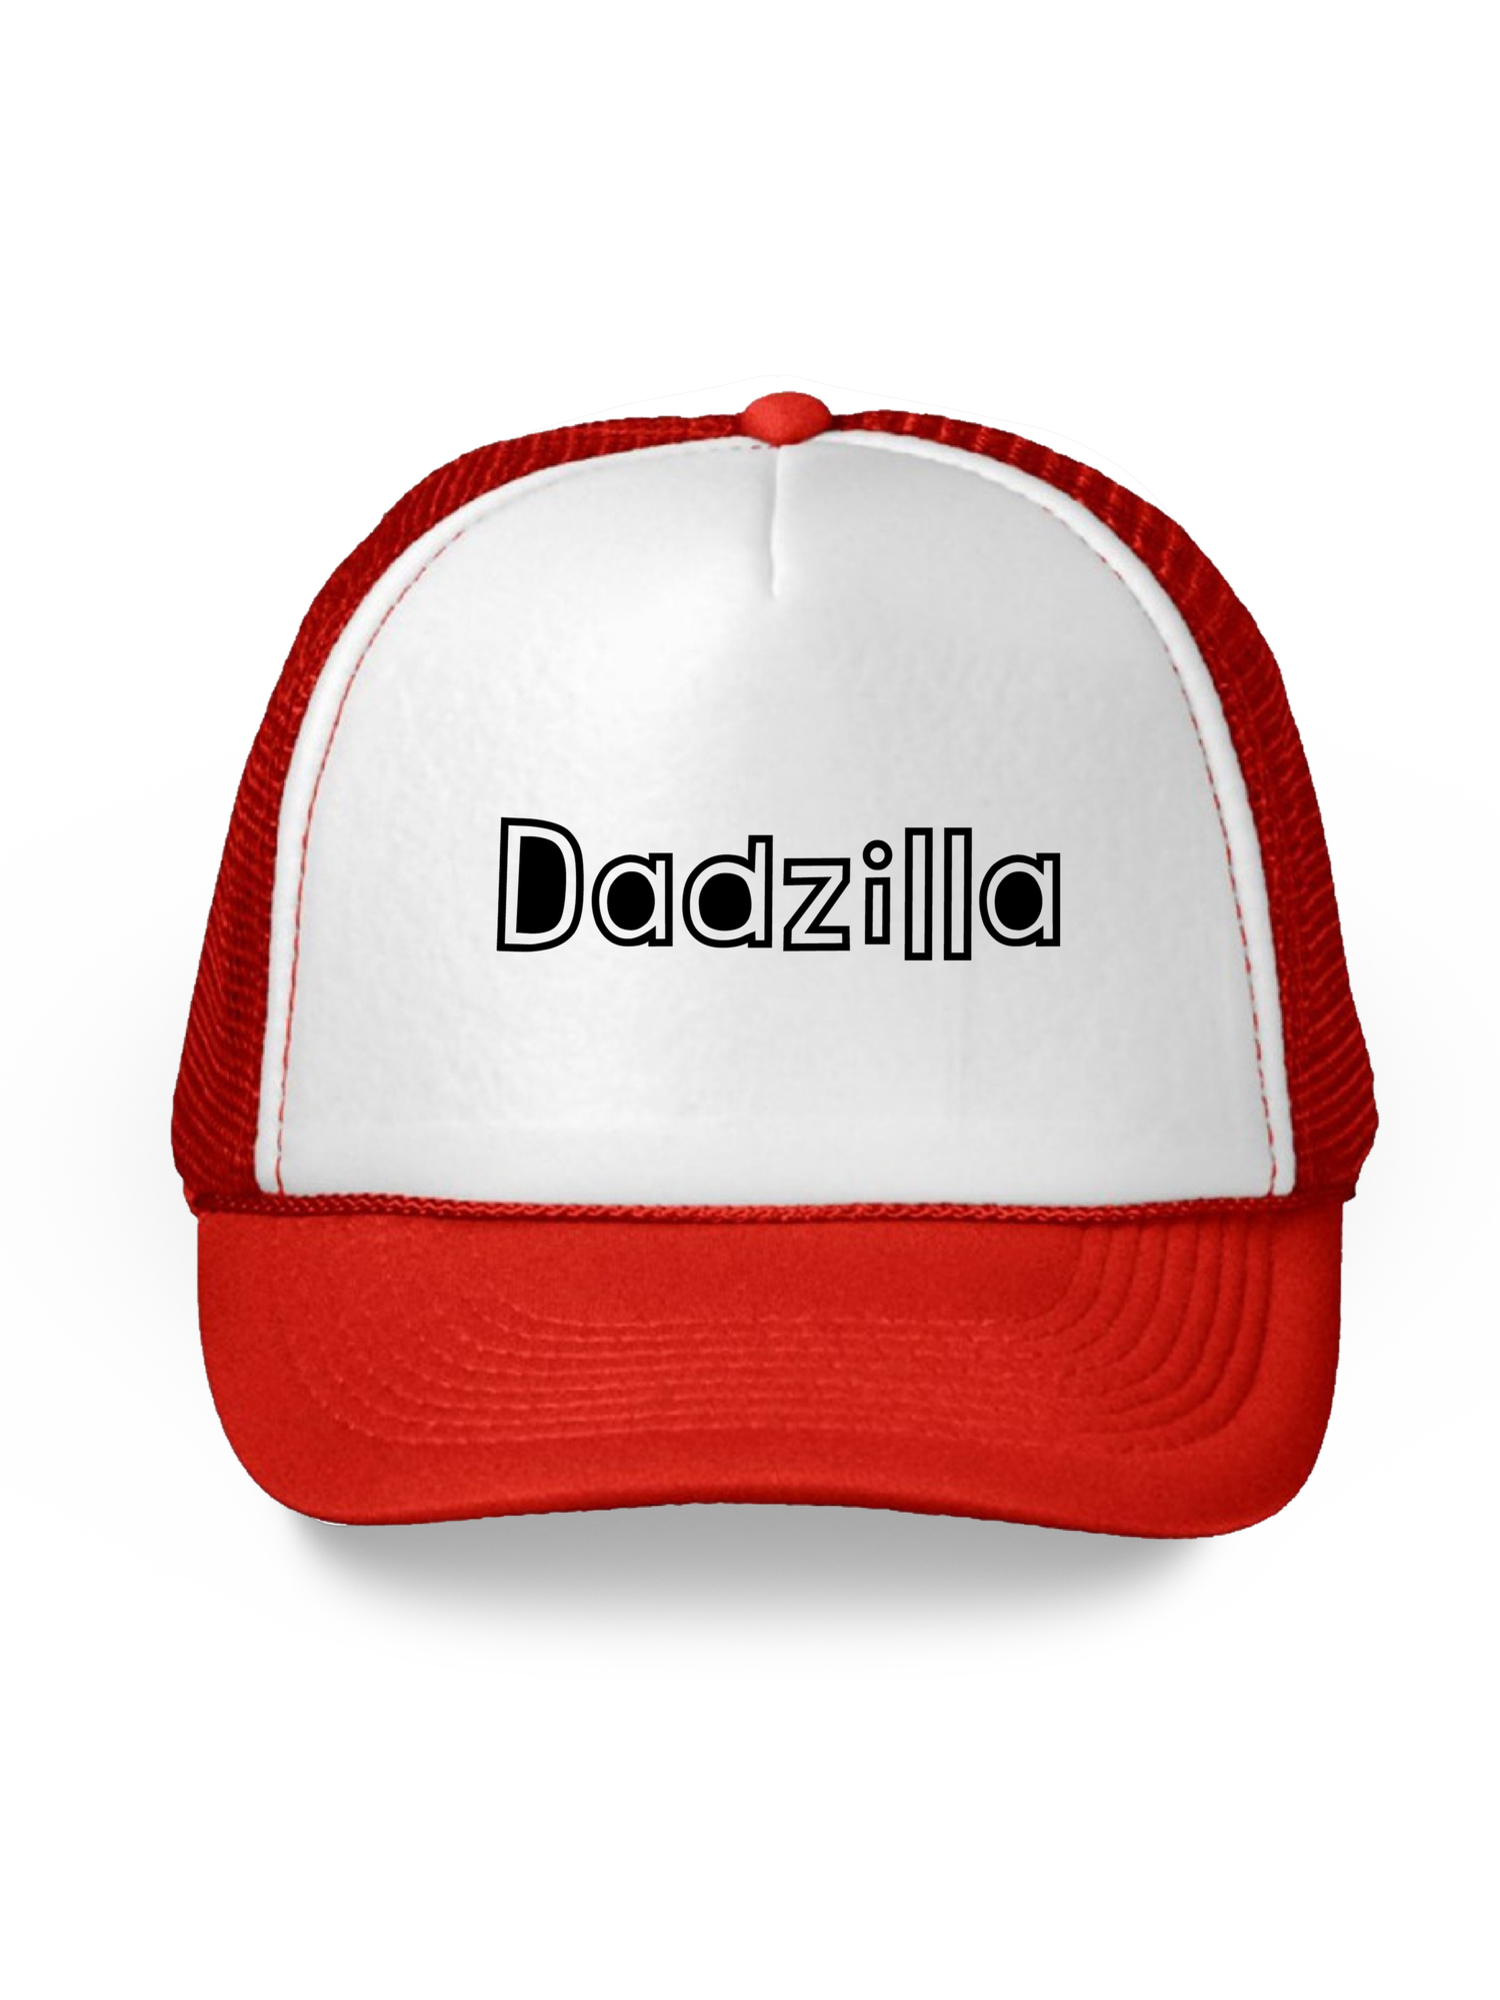 Awkward Styles Gifts for Dad Dadzilla Trucker Hat Funny Dad Hats With Sayings Father's Day Gifts for Men Dad 2018 Hat Boss Dad Snapback Hat Father's Day Trucker Hats for Men Dad Accessories Daddy Cap - image 1 of 6